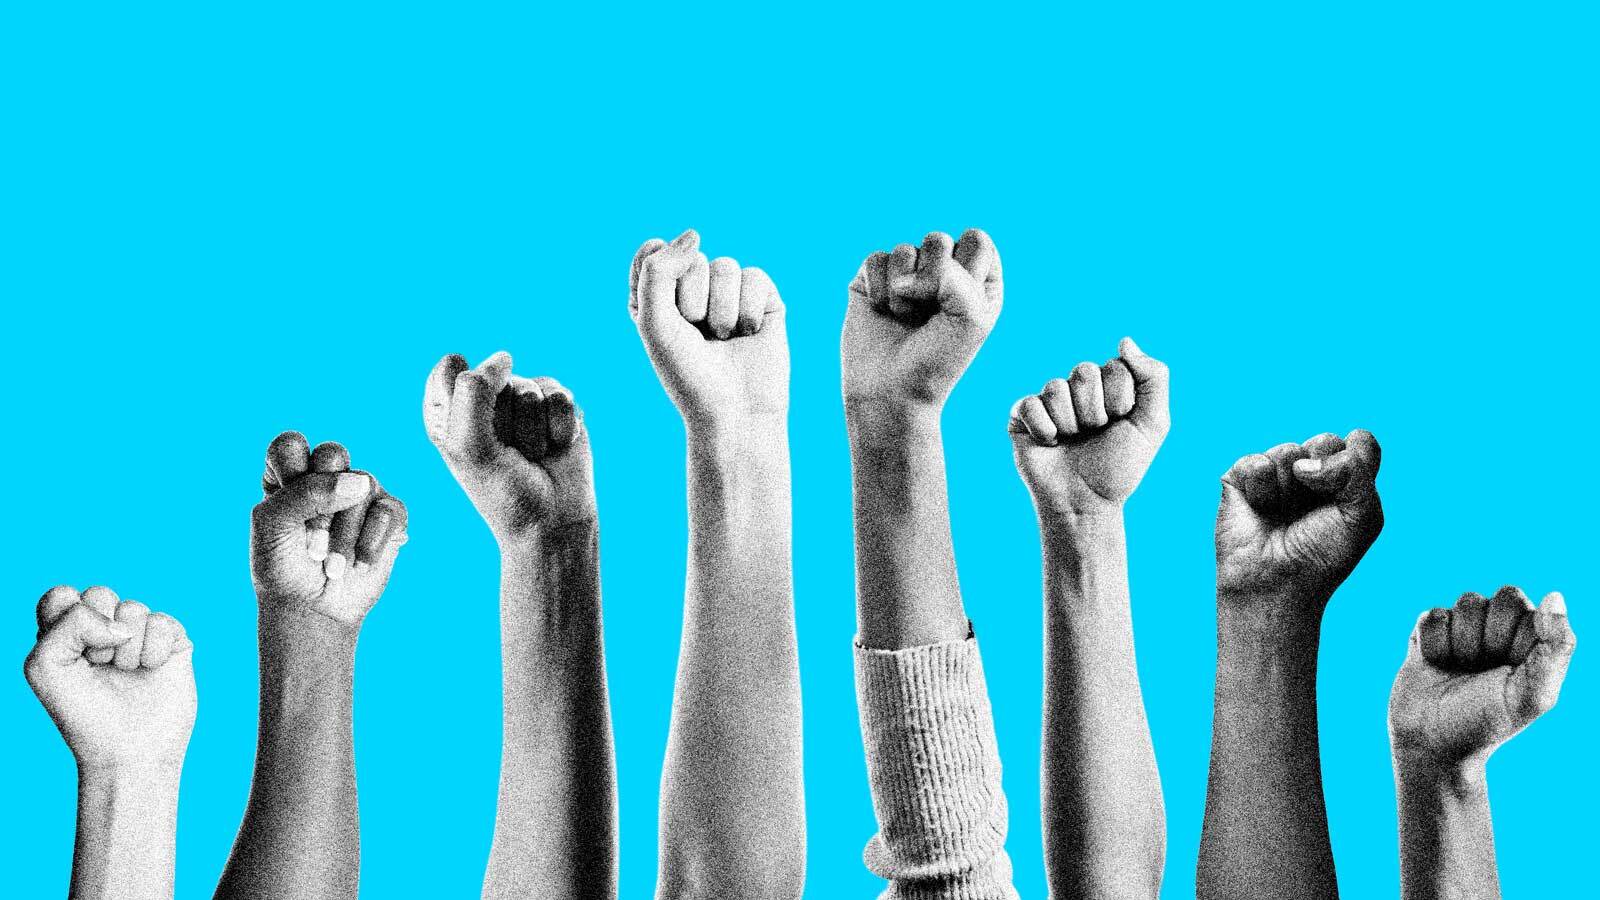 A group of fists raised to the sky against a bright blue background